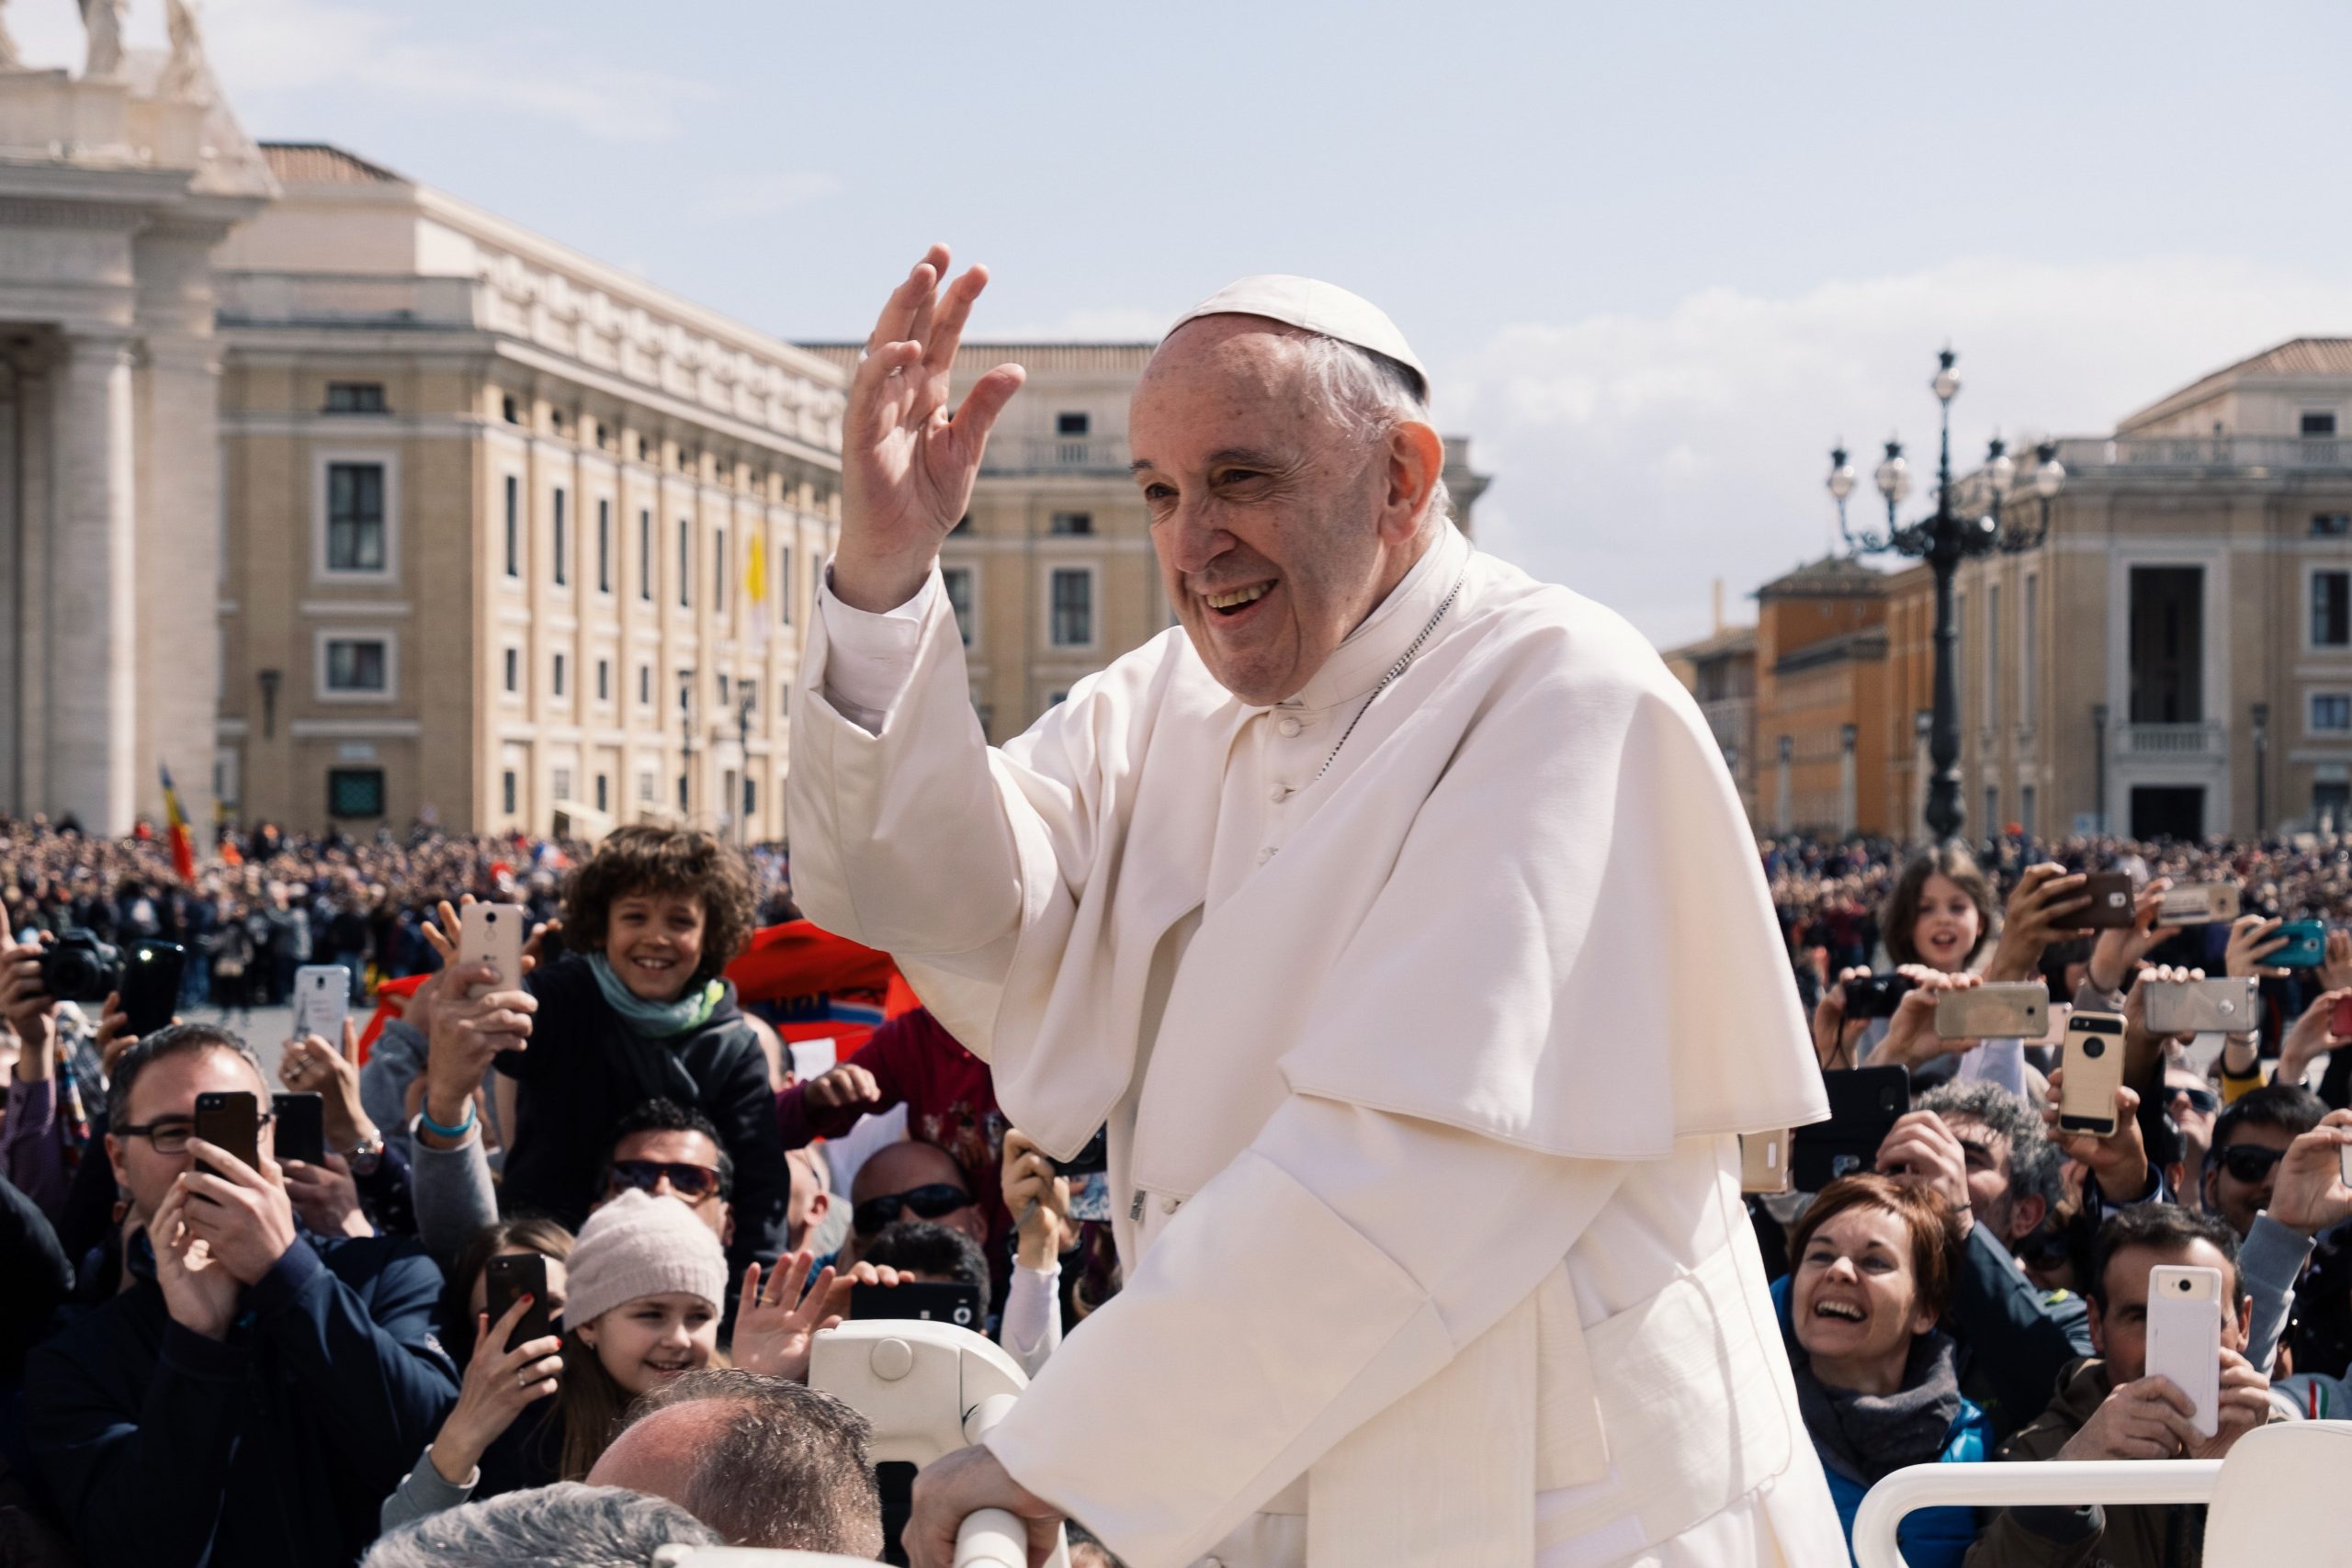 Pope Francis to receive COVID-19 vaccine next week